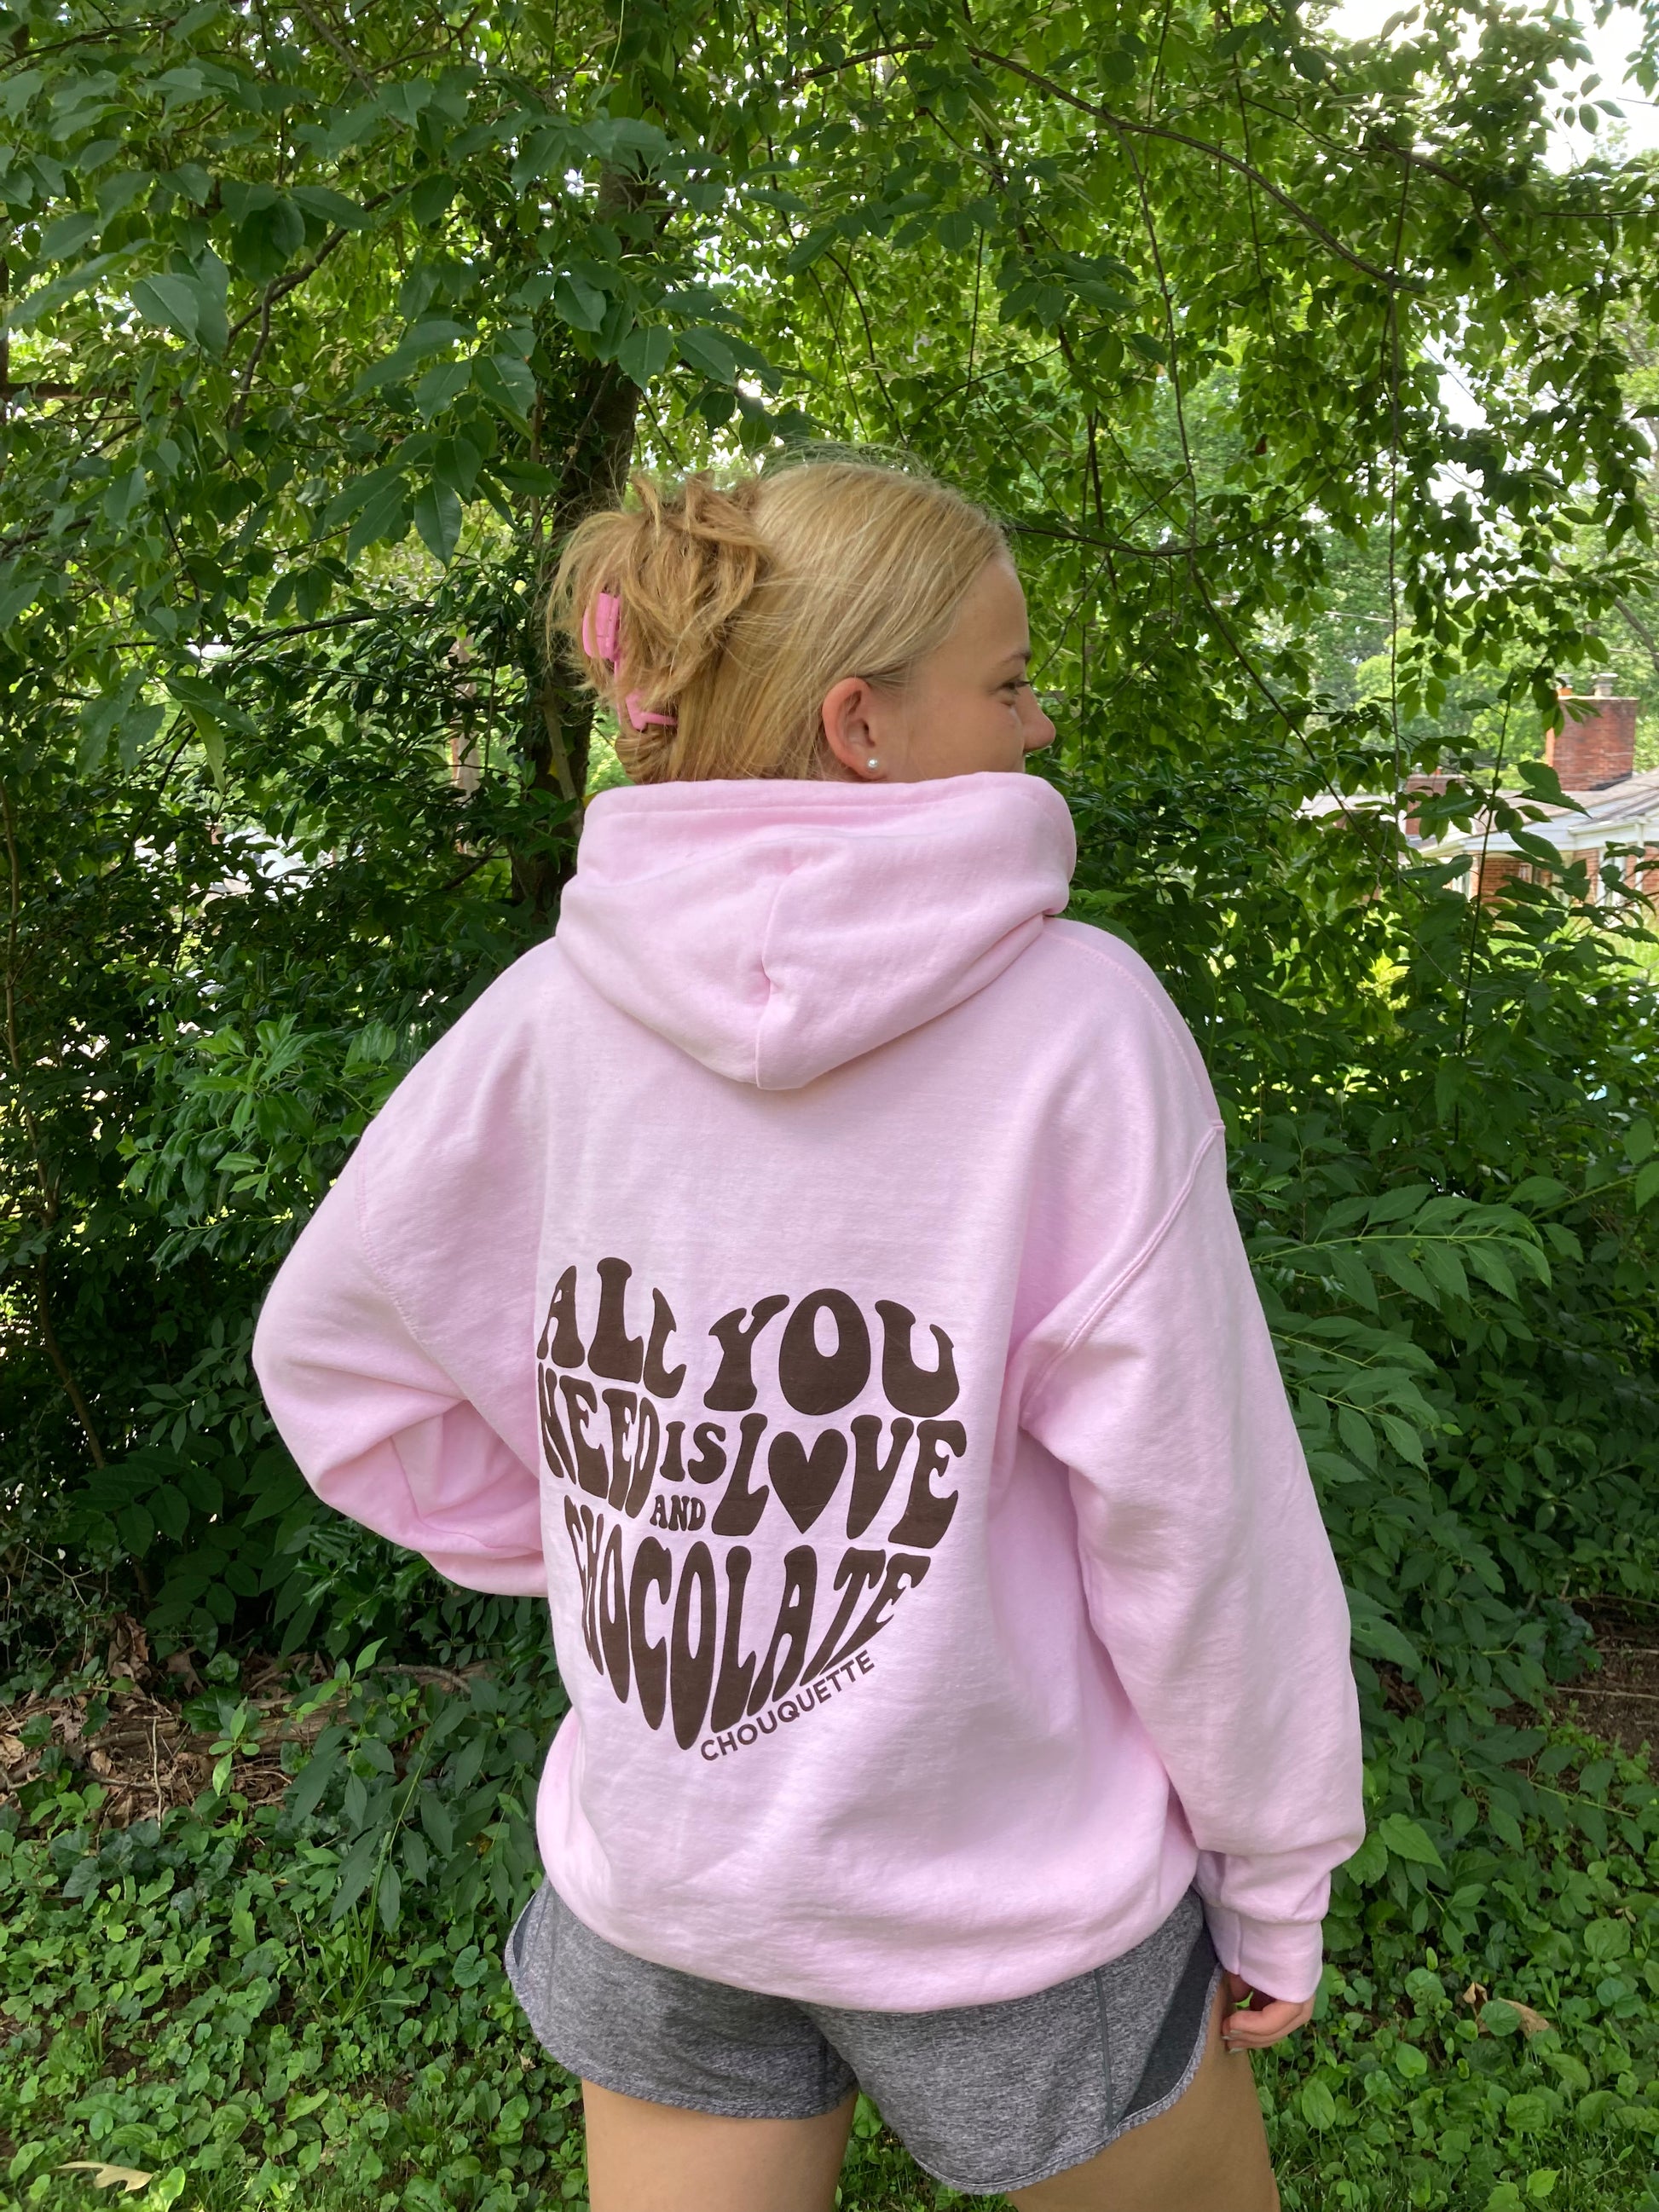 All You Need is Love and Chocolate Pink Hoodie – Chouquette Chocolates